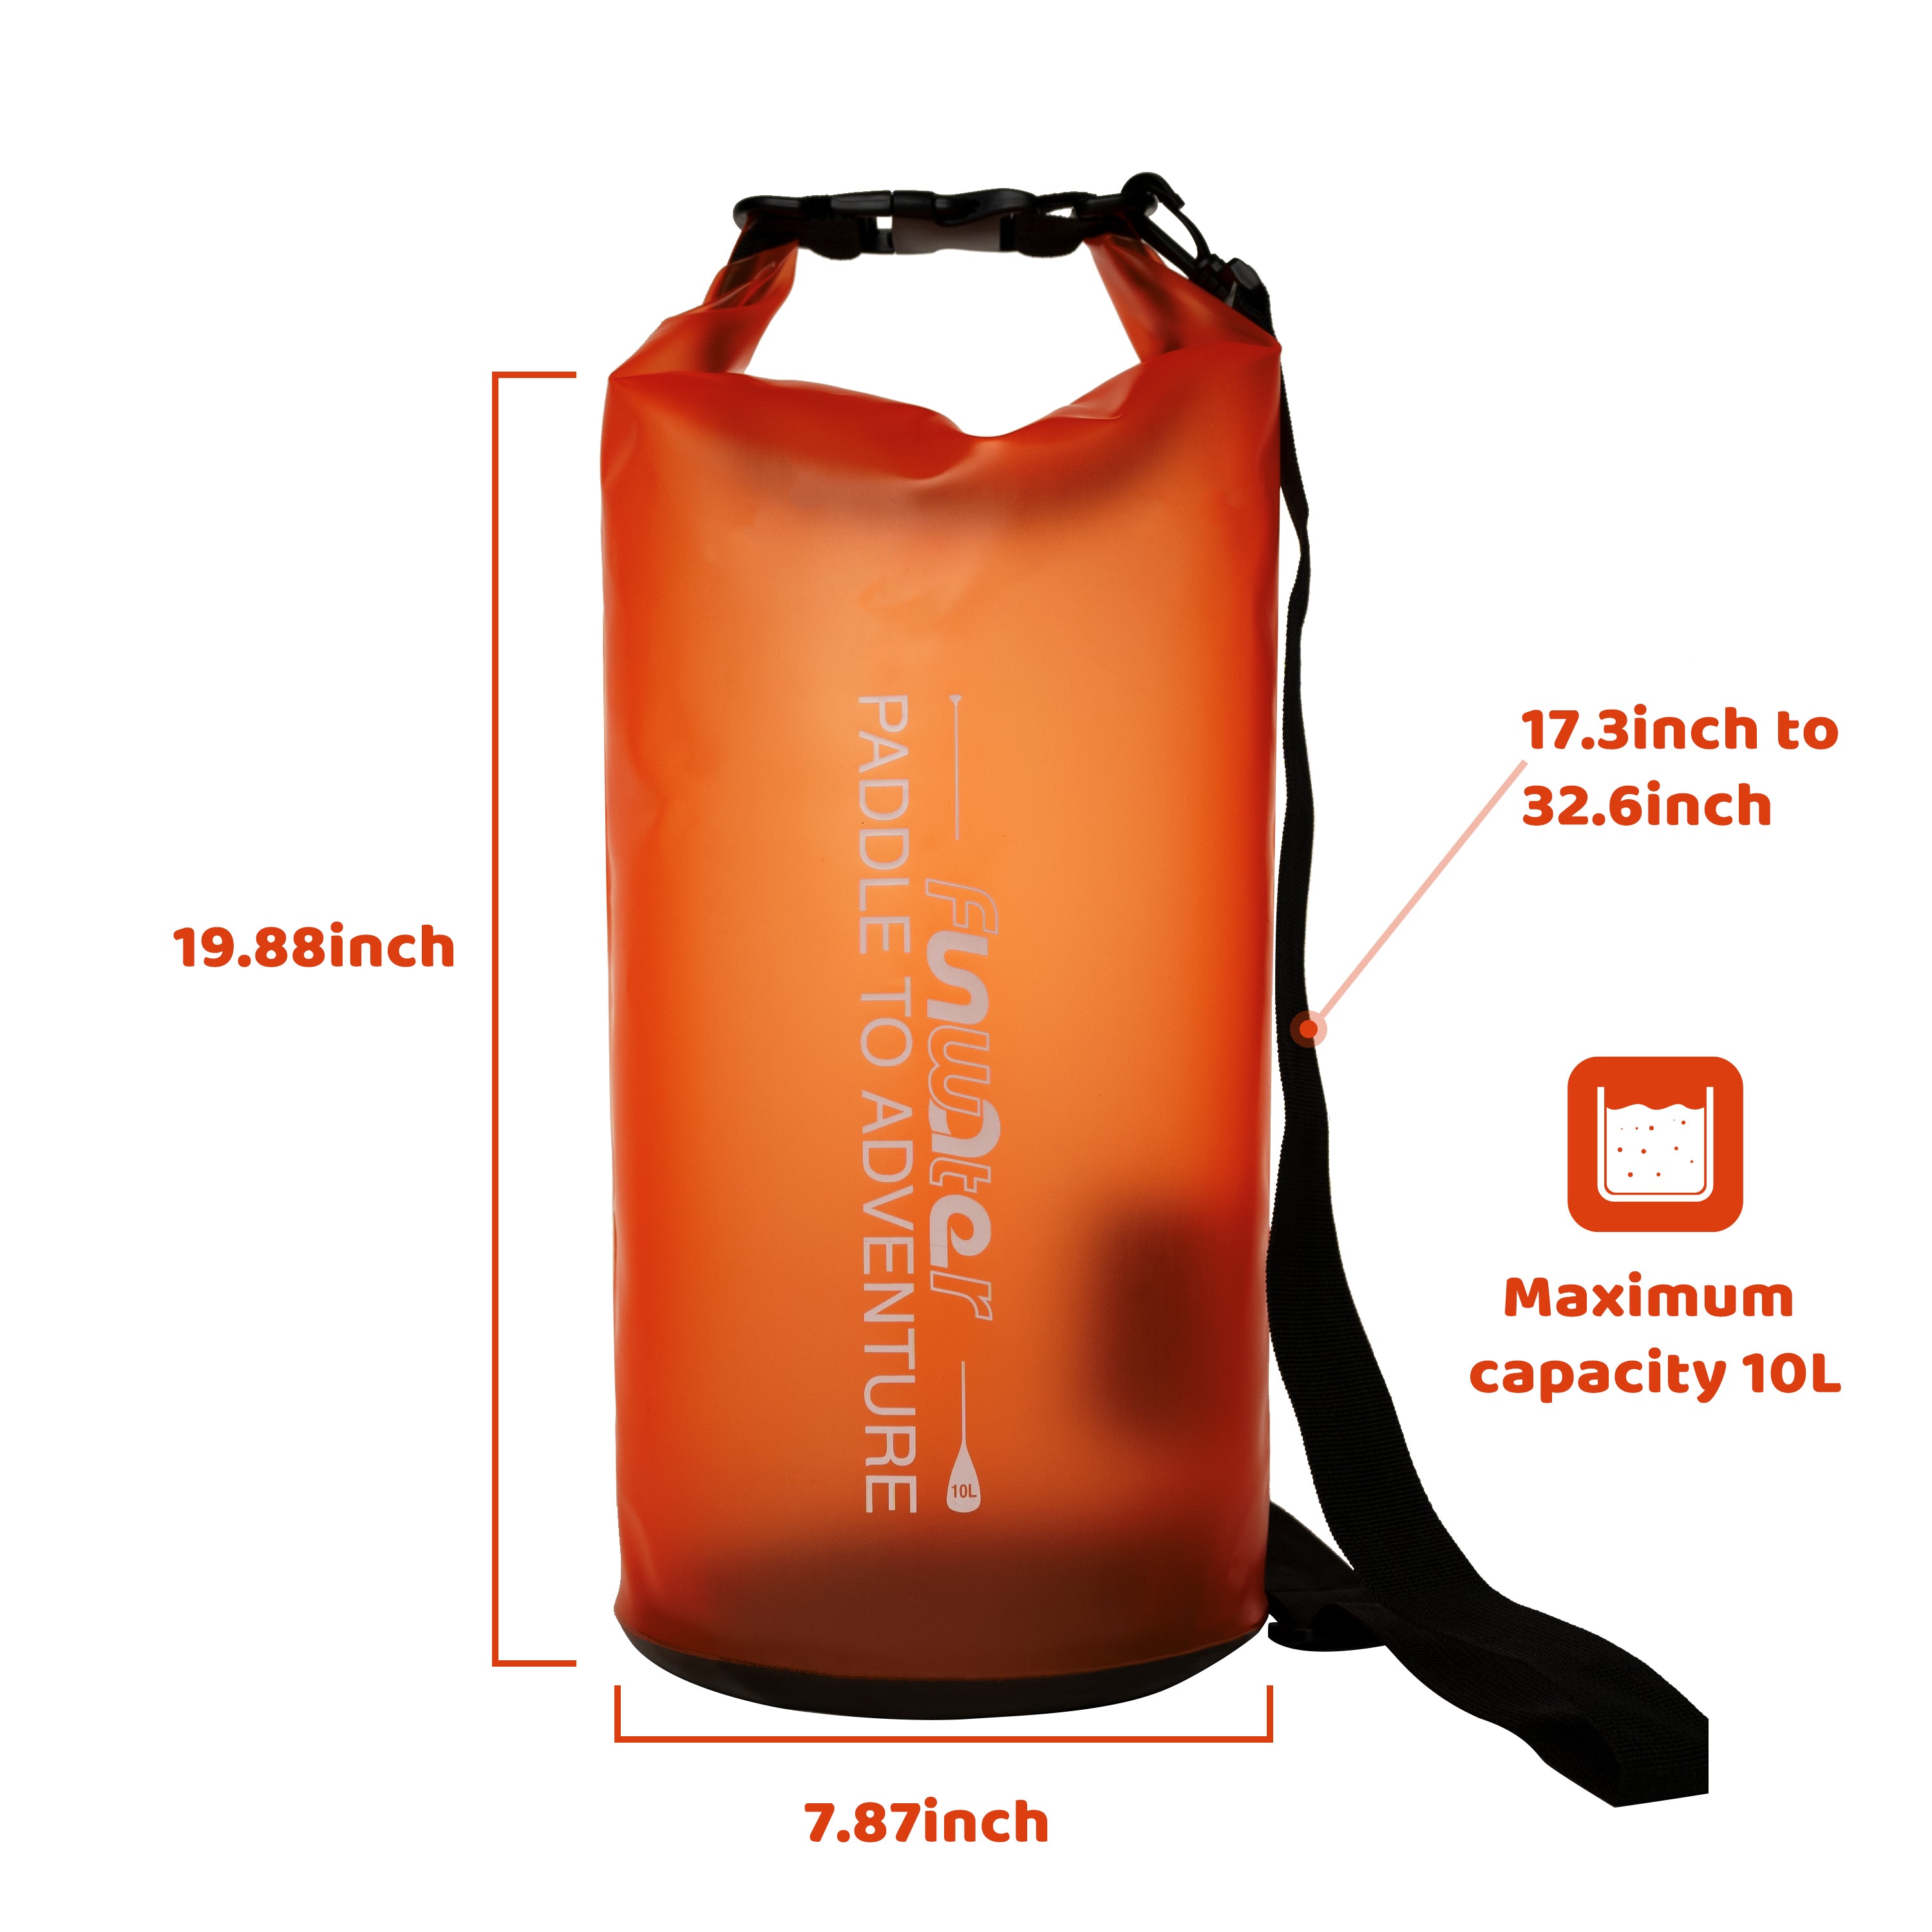 FunWater Waterproof Dry Bag for Women Men, 10L Roll Top Lightweight Dry Storage Bag for Travel, Swimming, Boating, Kayaking, Camping and Beach